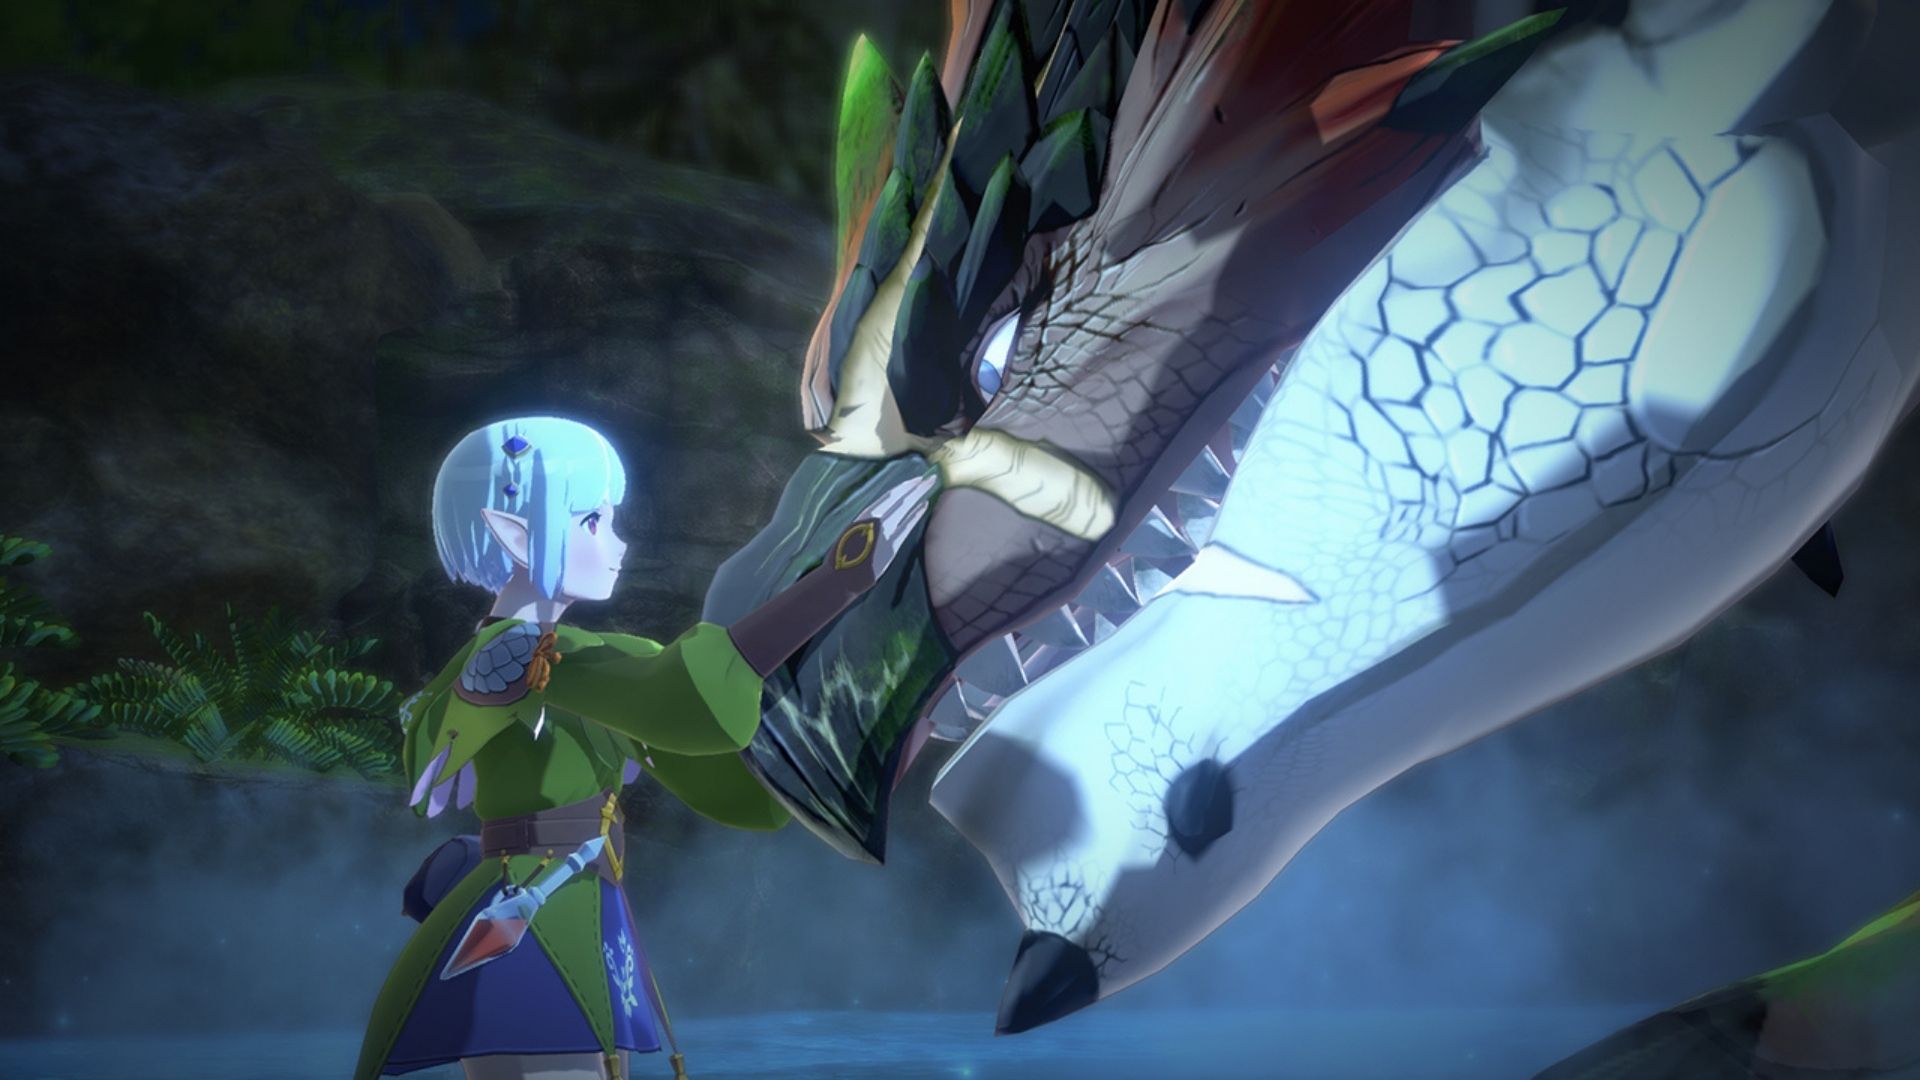 A screenshot from Monster Hunter Stories 2, a game like Pokémon, featuring a woman touch a dragons nose.